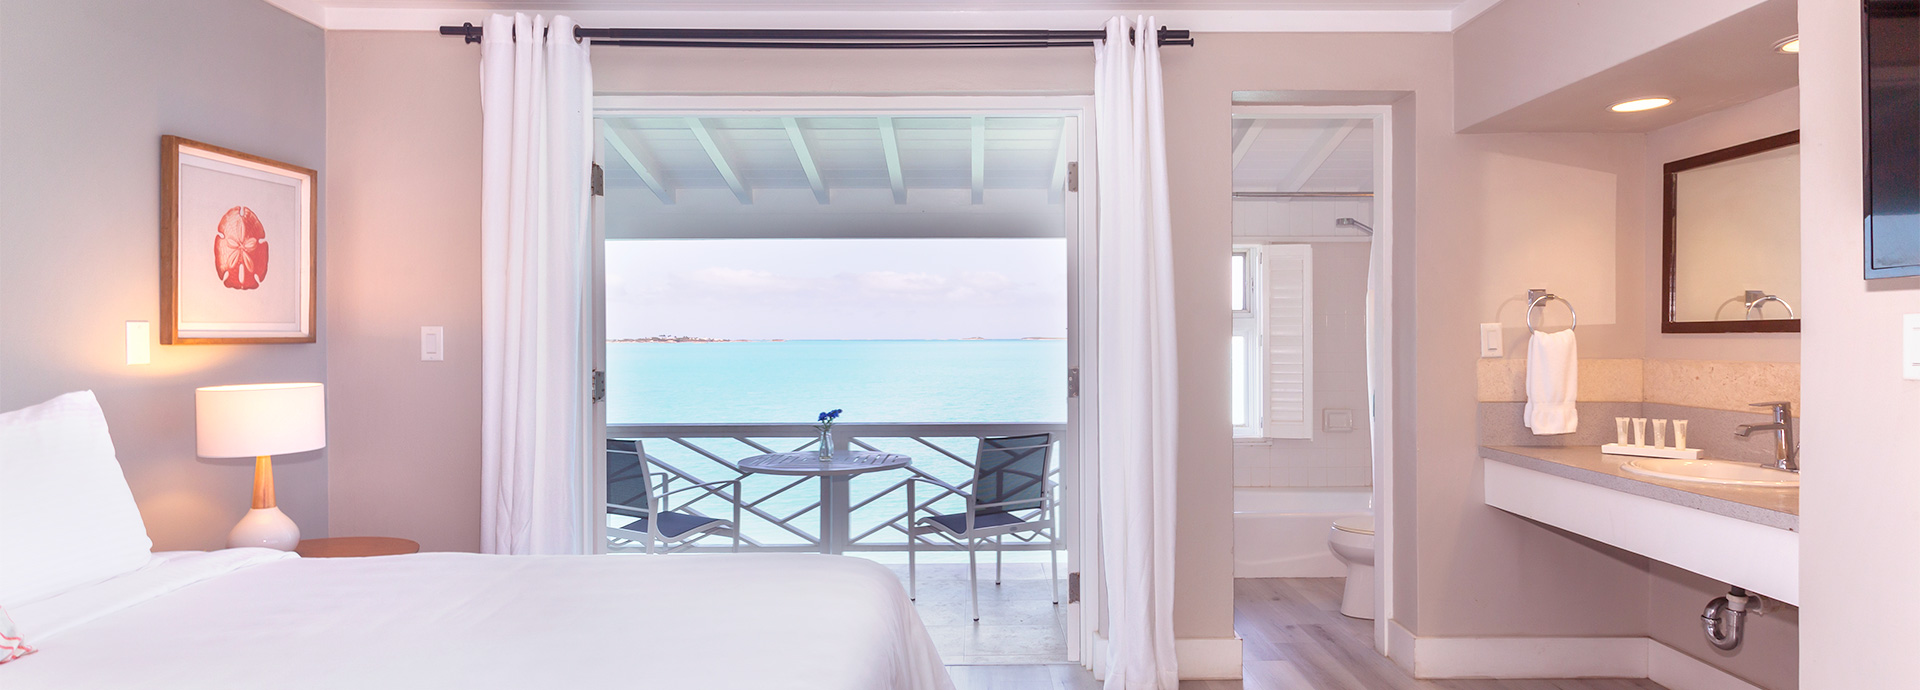 view of a hotel room with balcony and ocean view